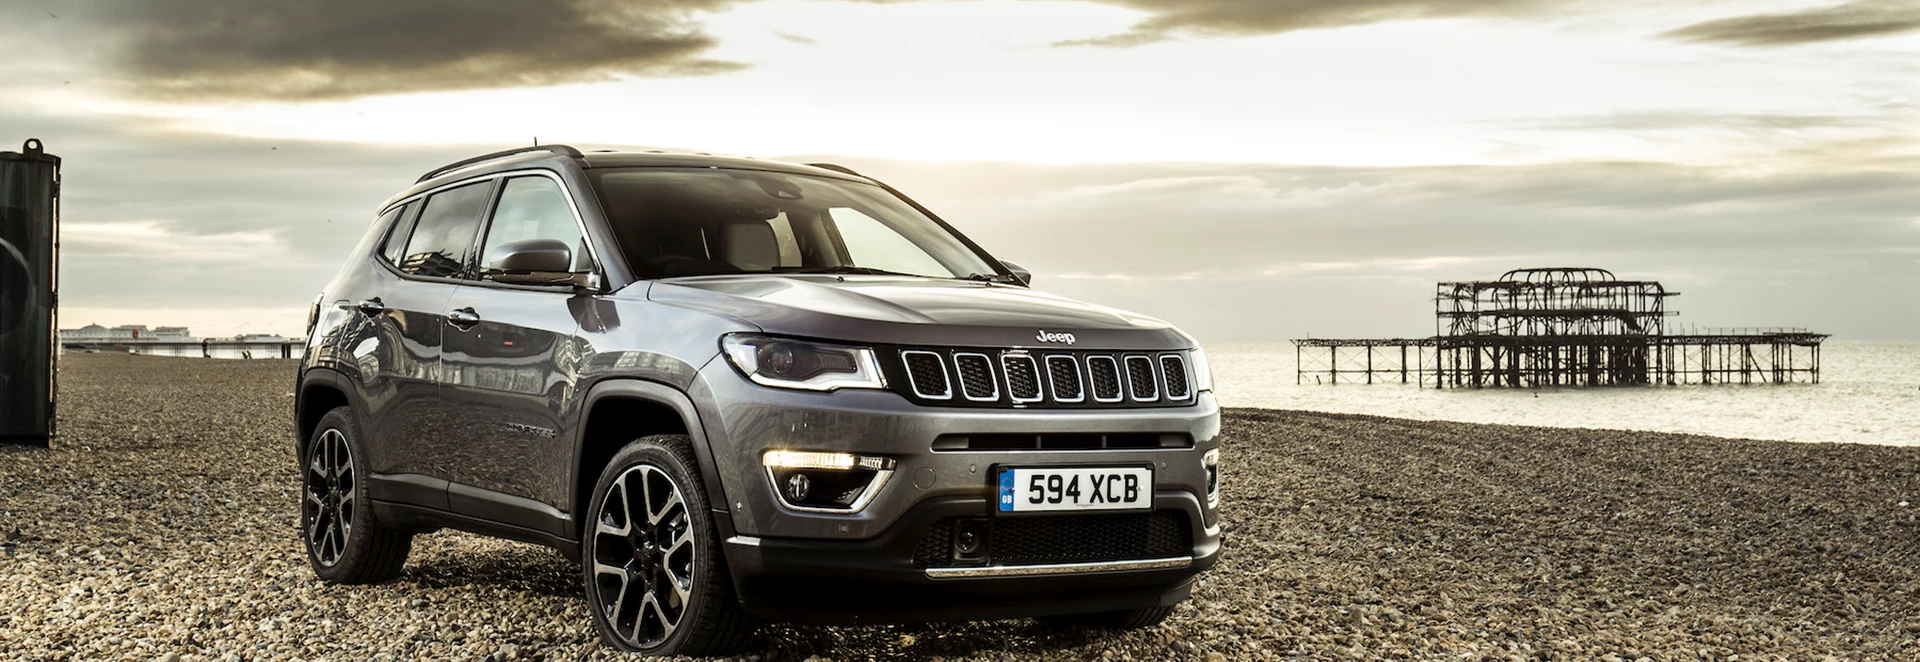 Buyer’s guide to the Jeep Compass